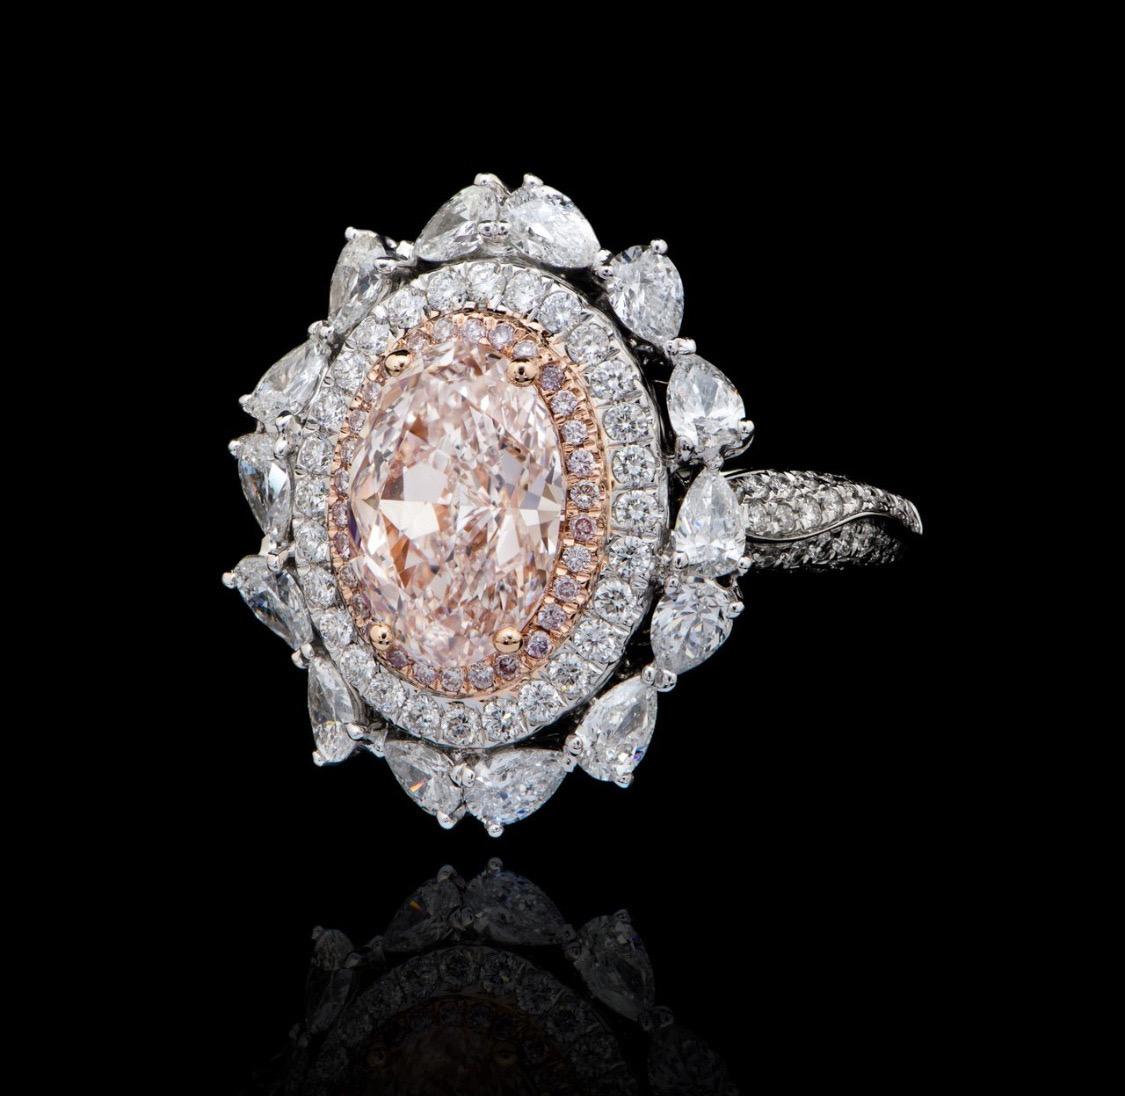 From The Museum Vault at Emilio Jewelry Located on New York's iconic Fifth Avenue,
Inquire for detailed video! 
Showcasing a very special and rare Gia certified natural fancy very light pink diamond ring. We specialize in creating special mountings